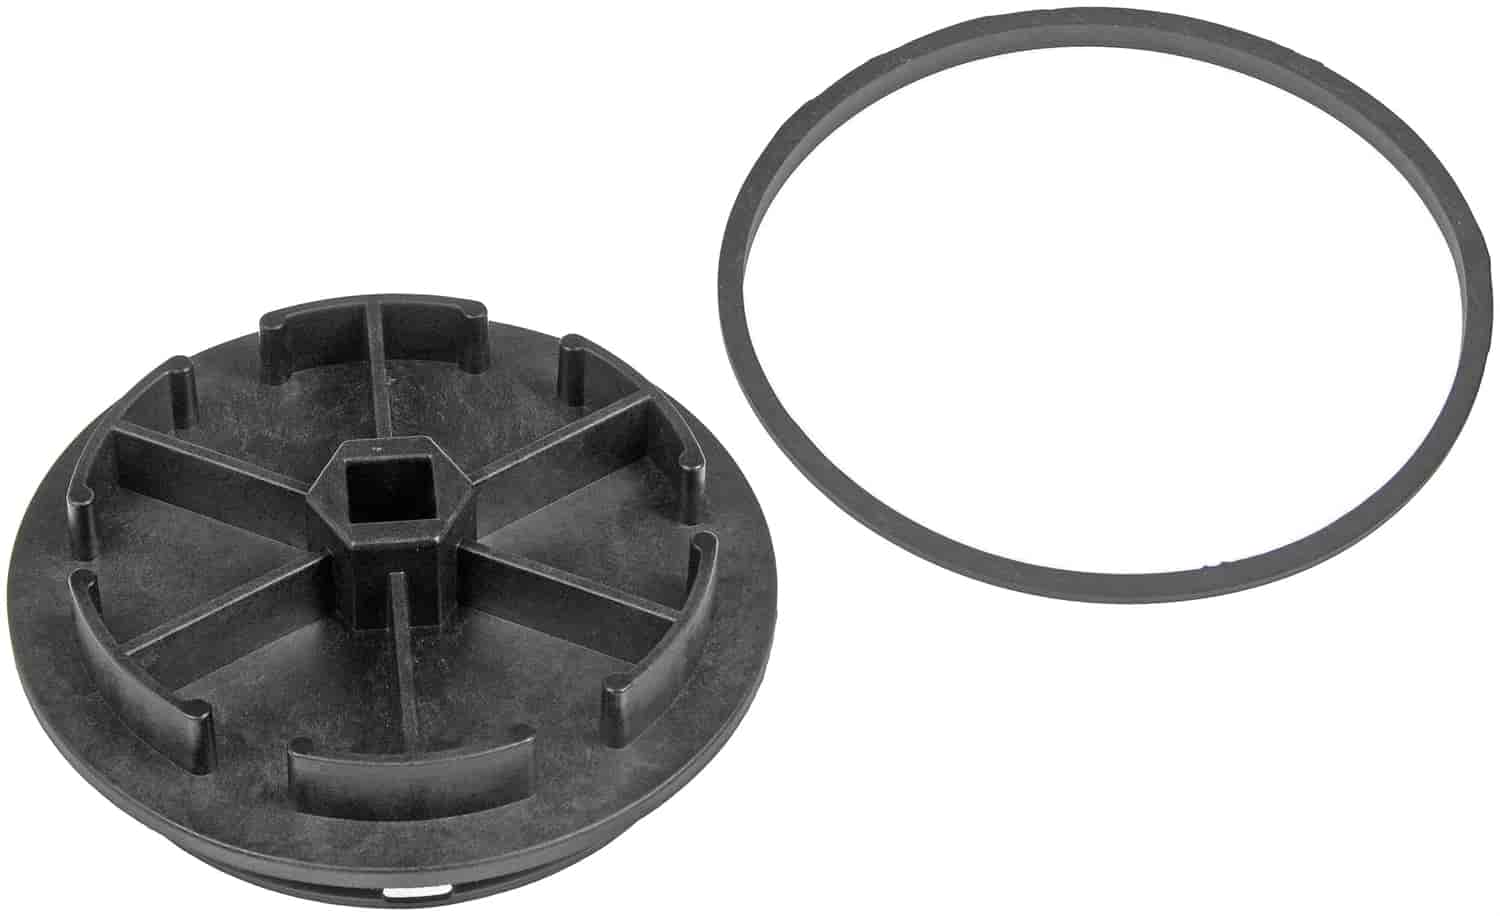 Diesel Fuel Filter Cap and Gasket for 1994-1998